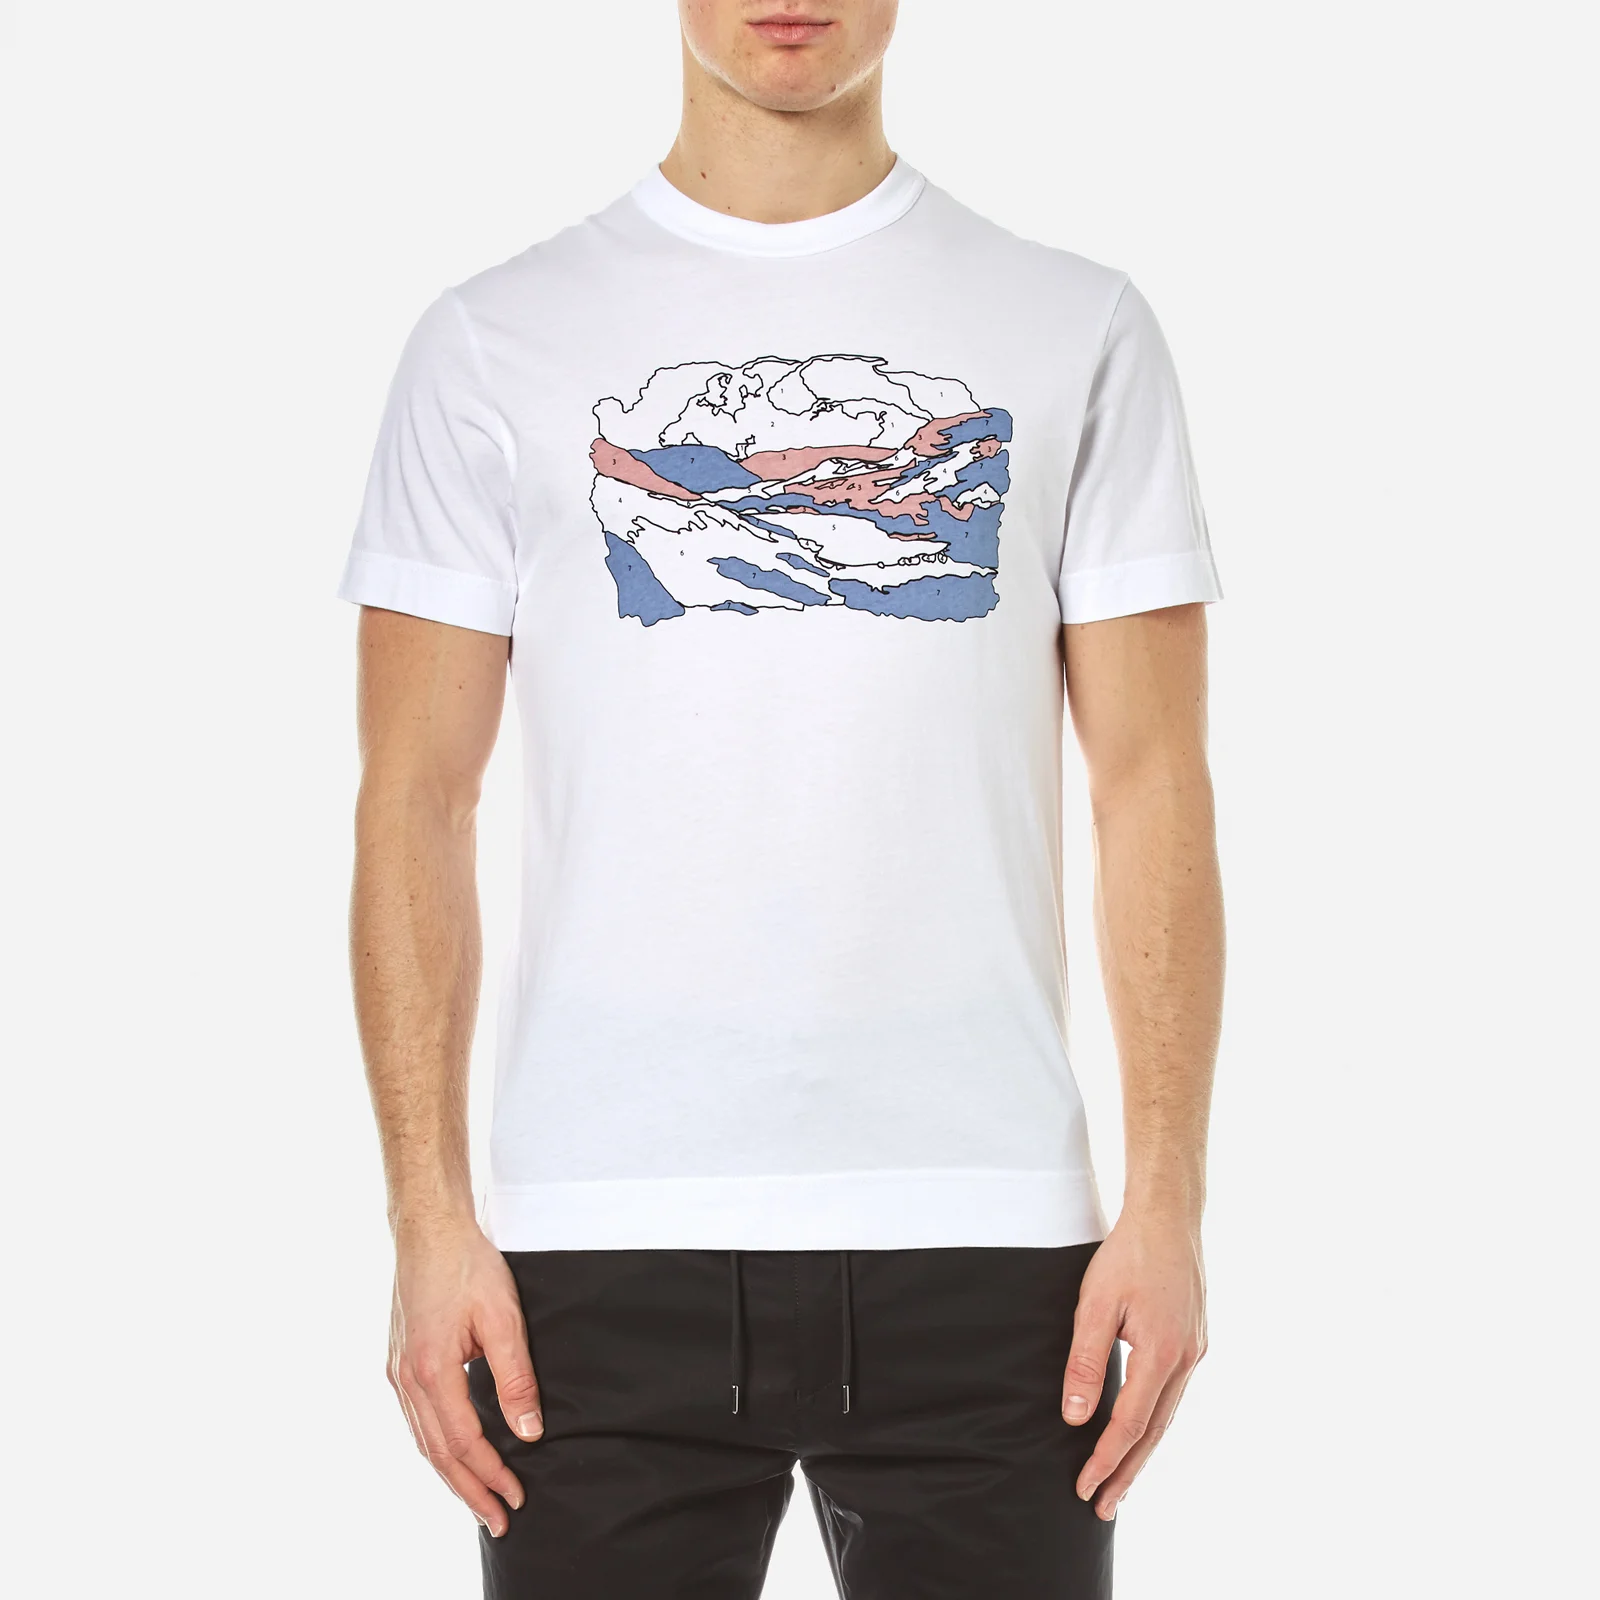 Garbstore Men's By Numbers T-Shirt - White Image 1